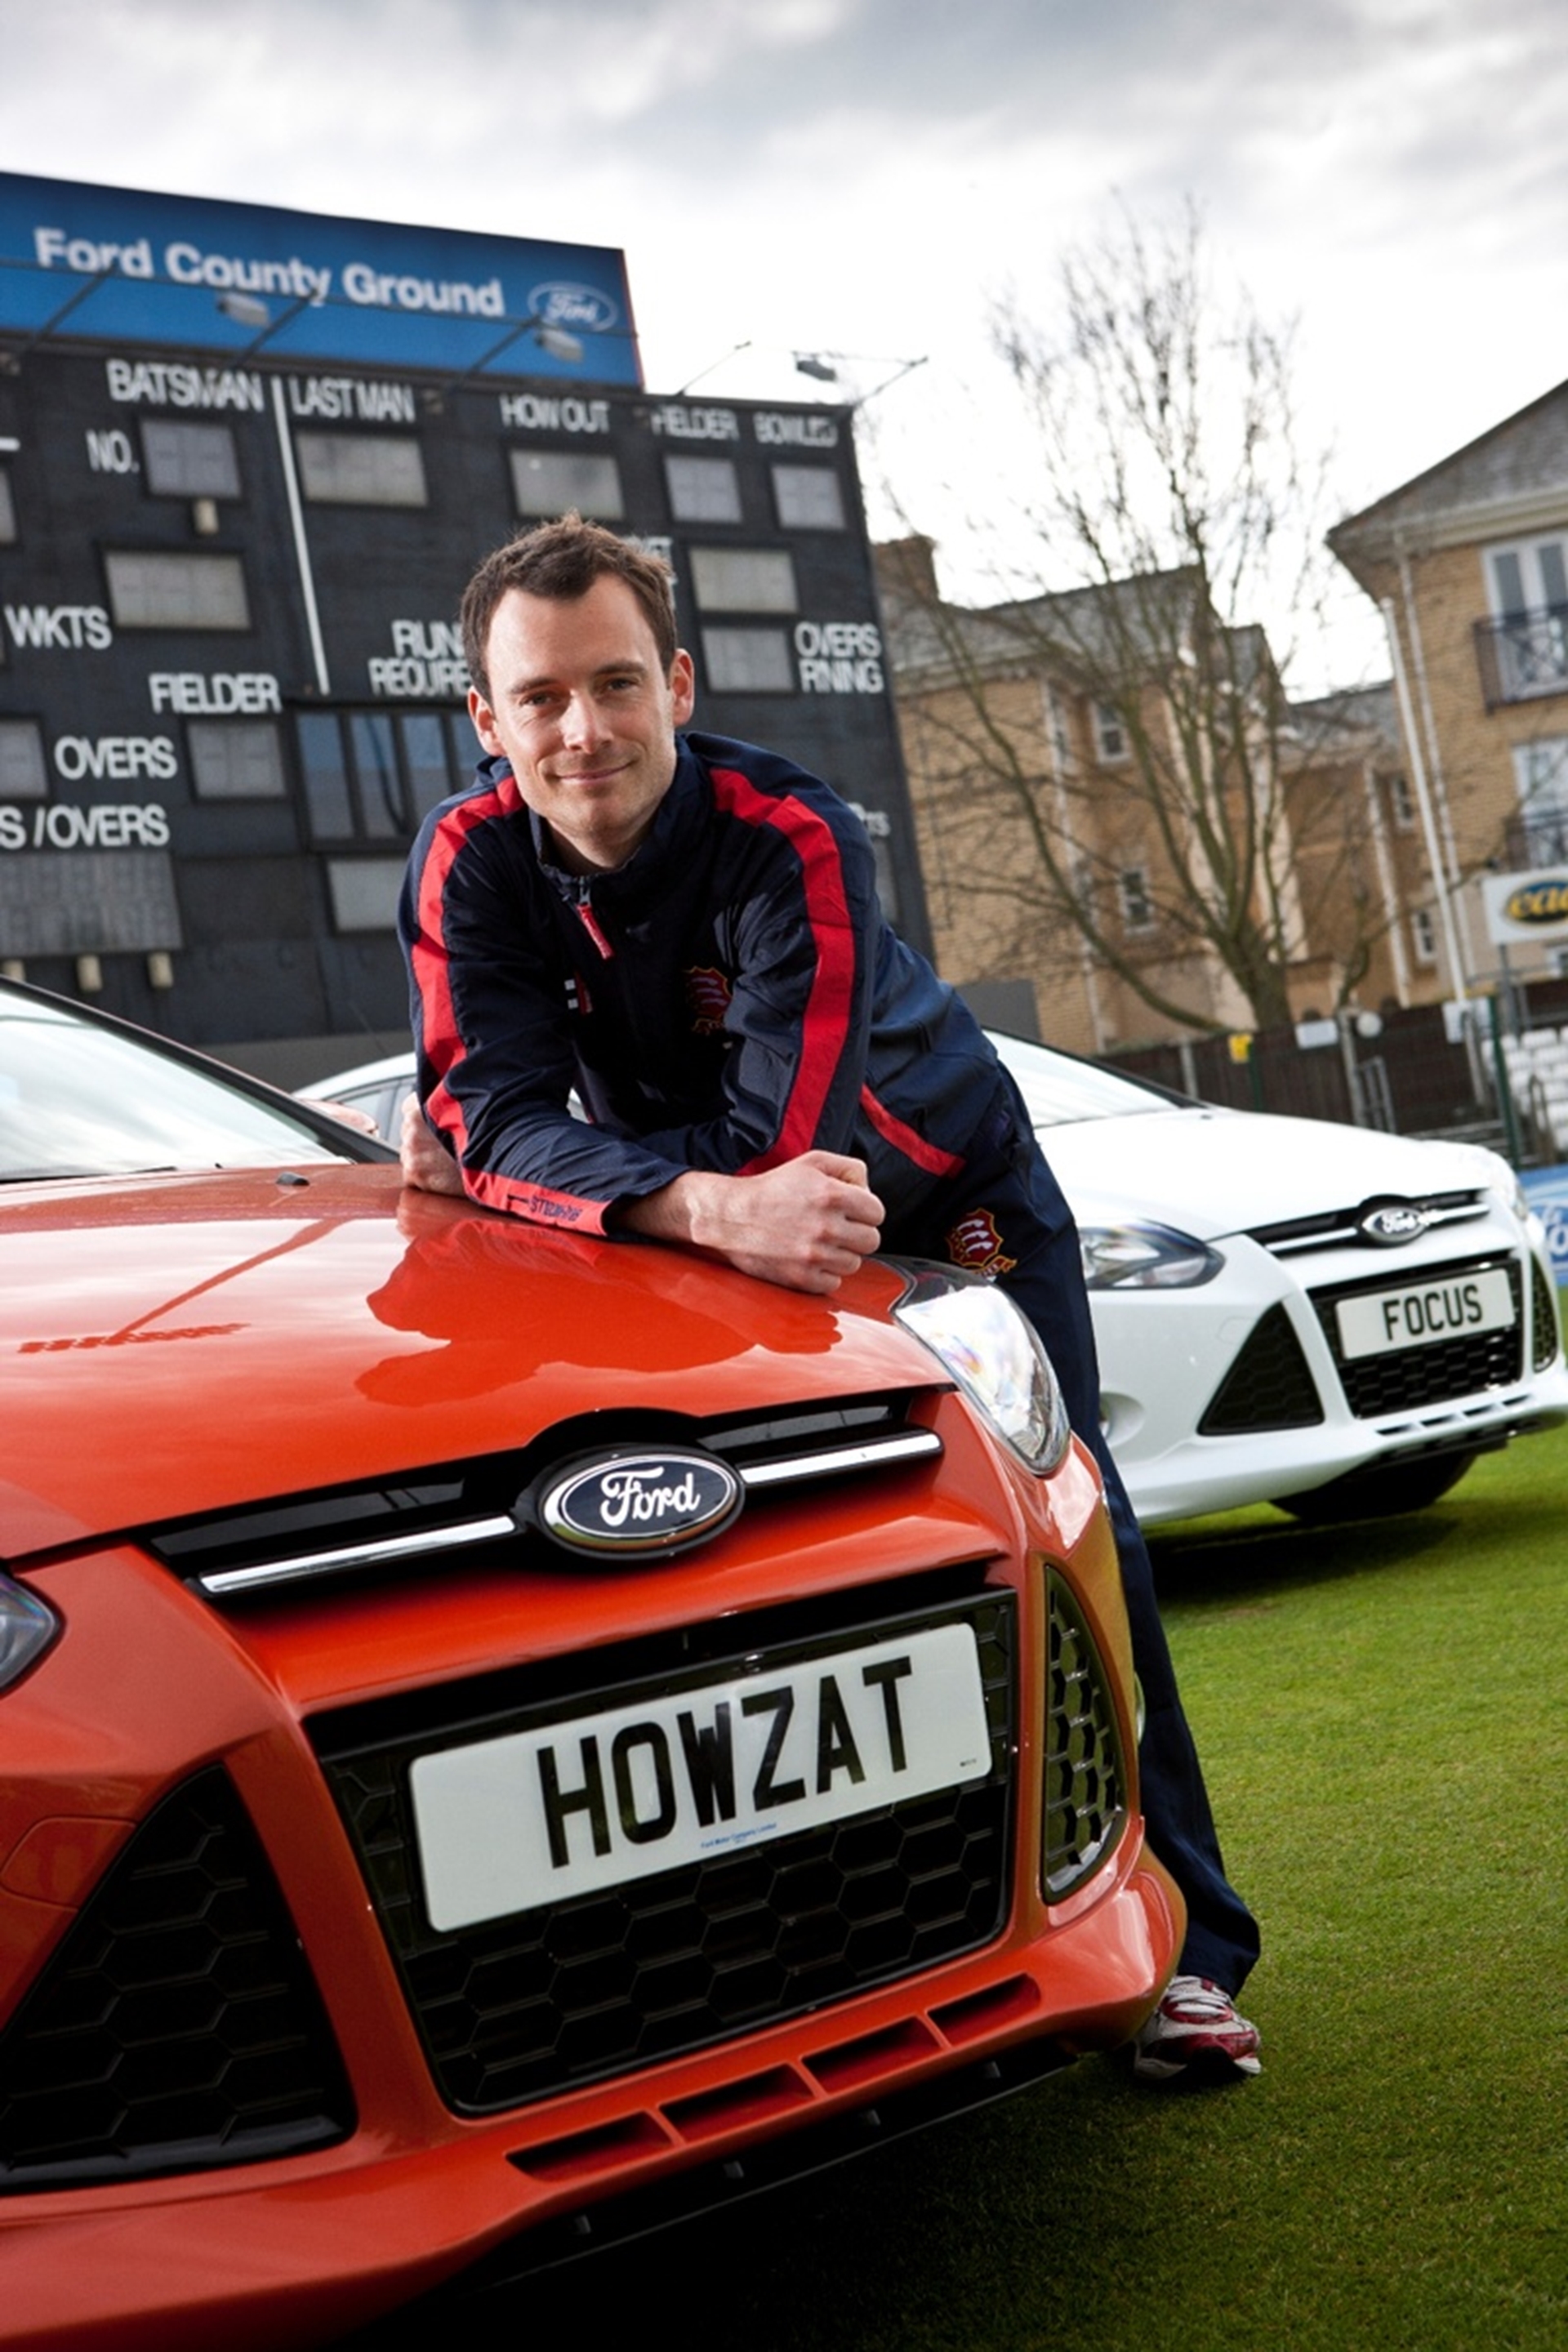 ESSEX CRICKET CAPTAIN CHOOSES A HIGH-TECH FORD FOCUS FOR 2012